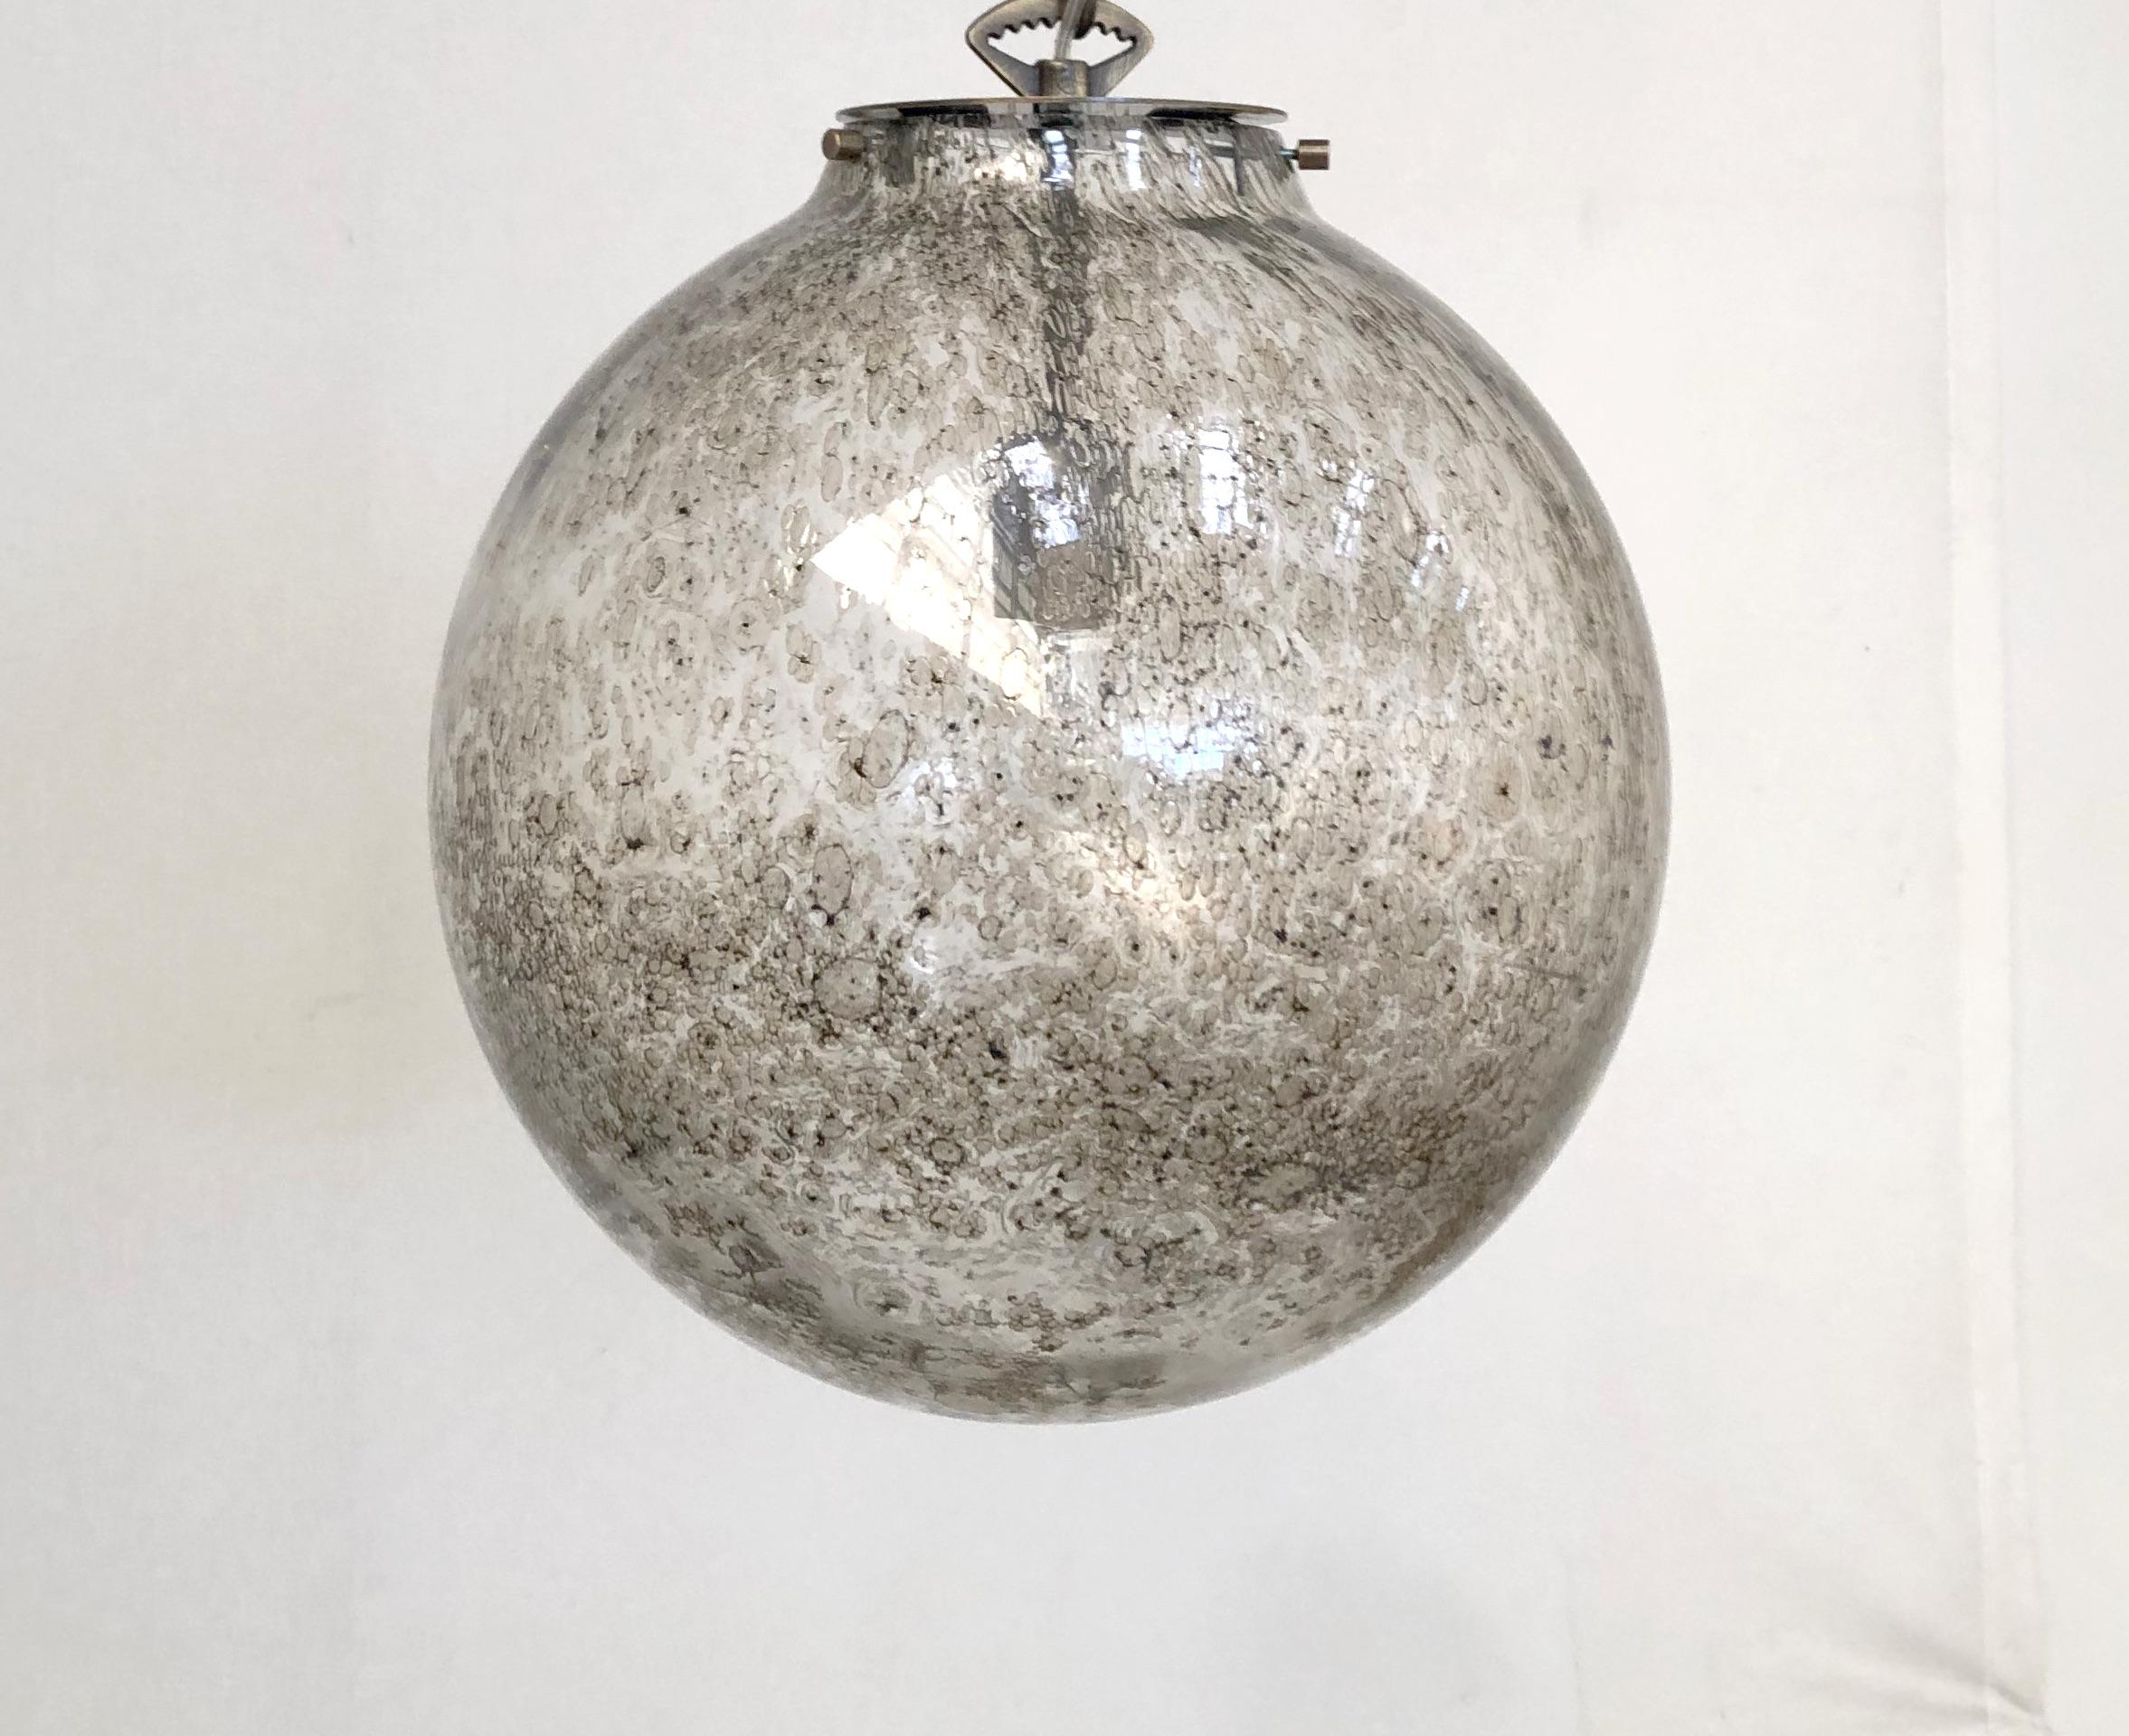 Italian pendant with a smoky Murano glass globe, carefully hand blown with bubbles within the glass using Bollicine technique, suspended from bronze metal chain and canopy / Made in Italy
Measures: diameter 20 inches, height 20 inches plus chain and